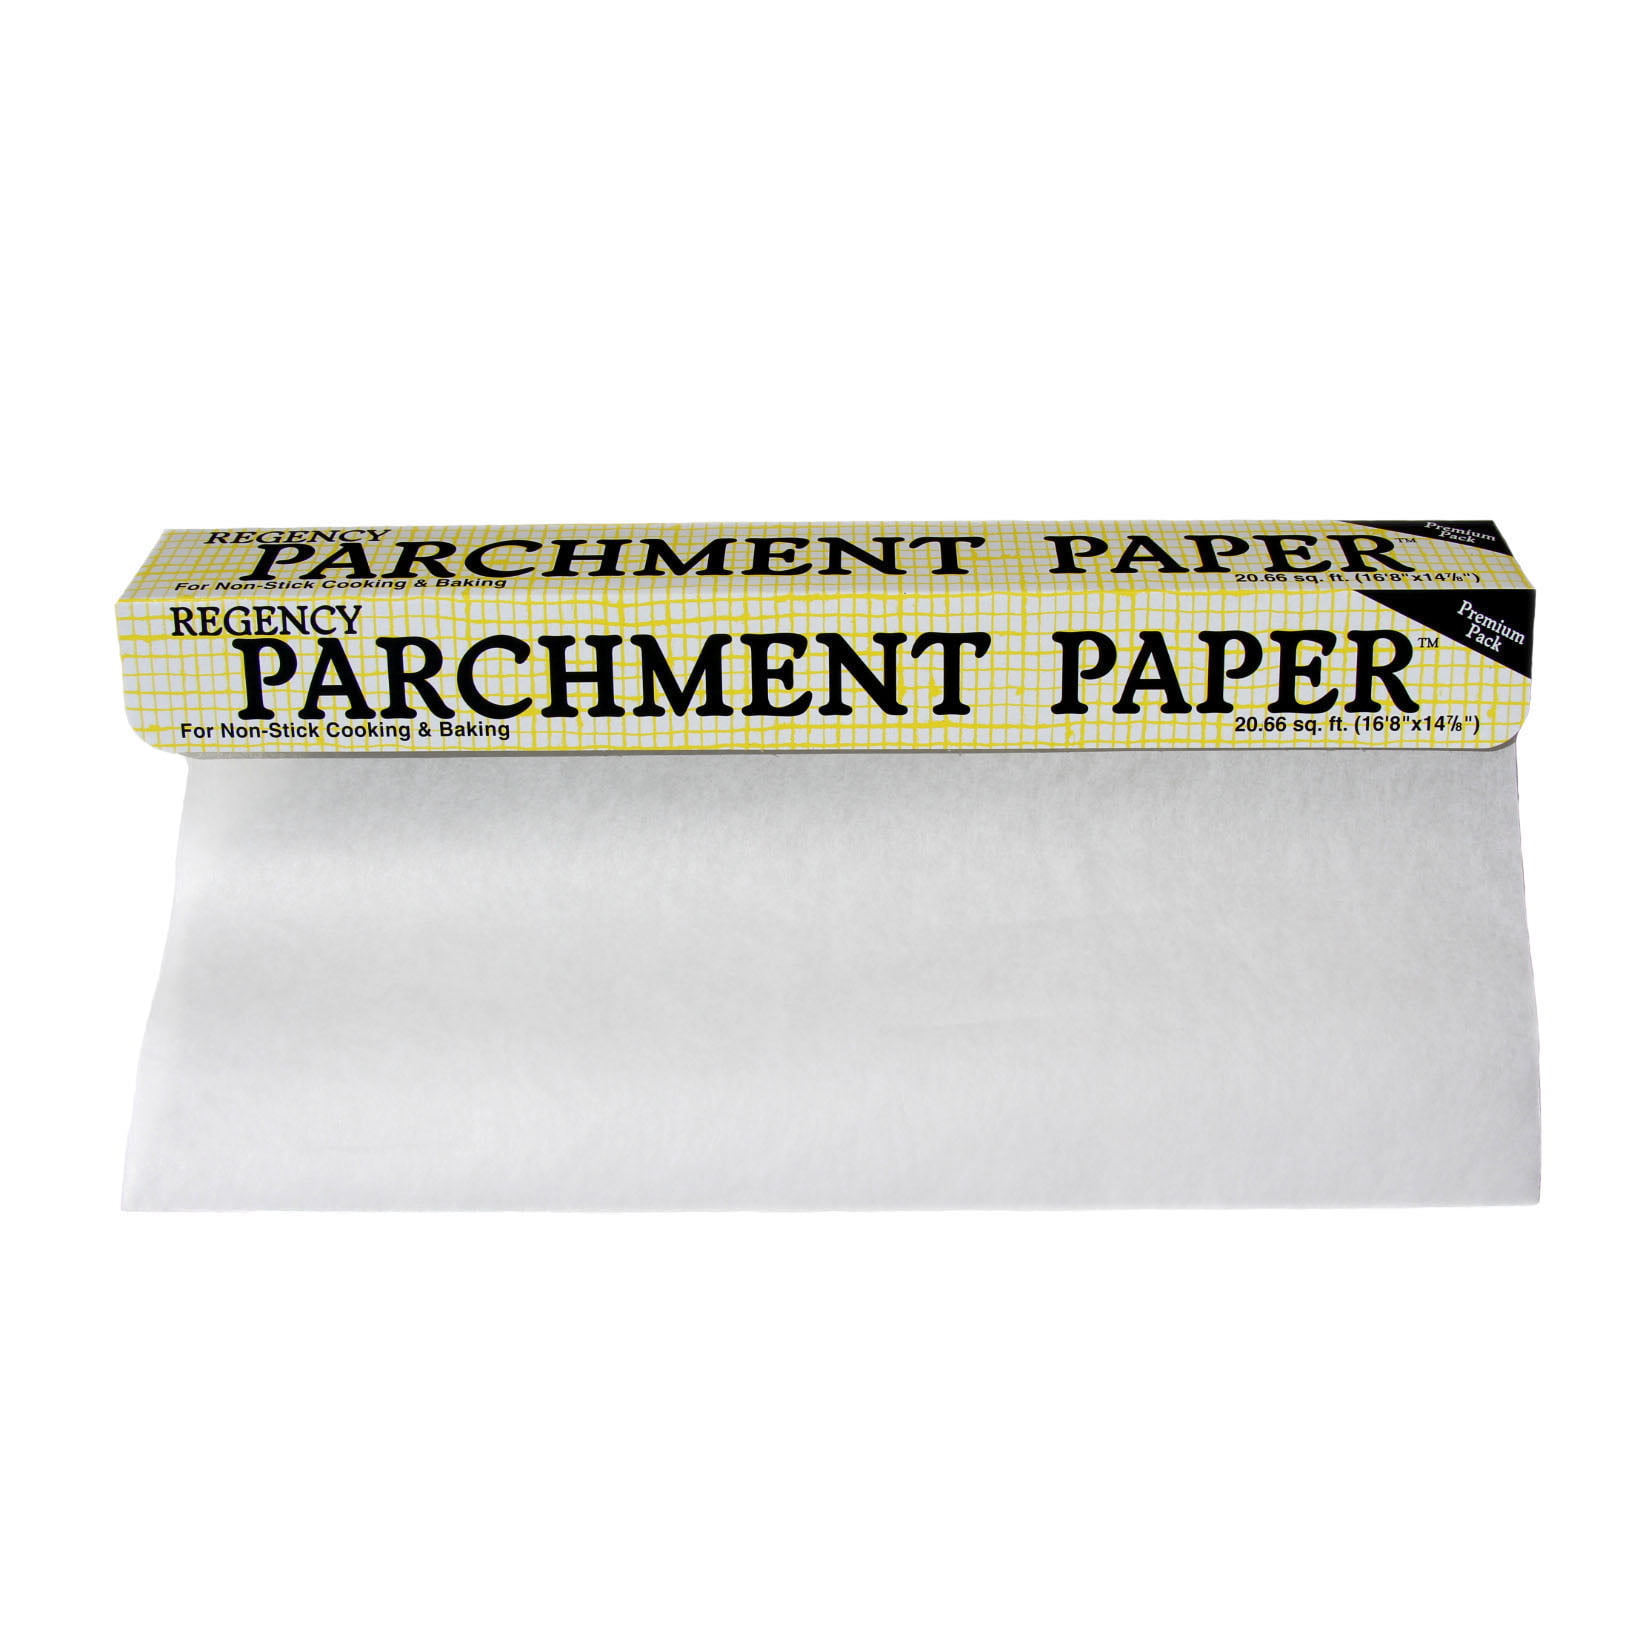 Roll Of Baking Parchment Paper Isolated On White Stock Photo, Picture and  Royalty Free Image. Image 43938815.